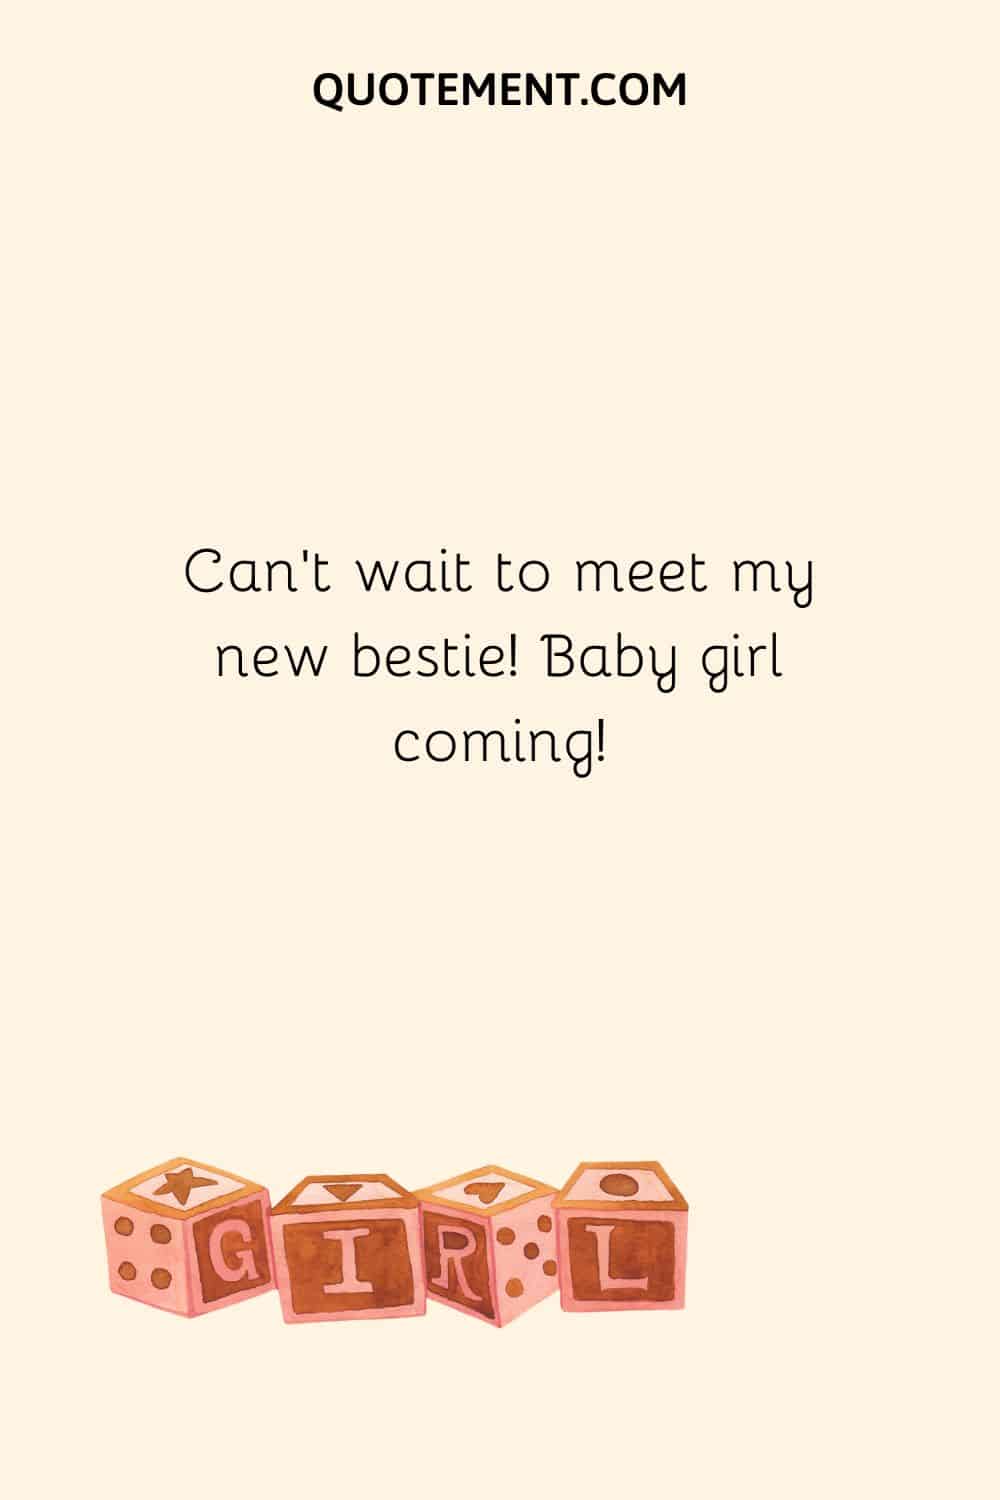 Can’t wait to meet my new bestie! Baby girl coming!